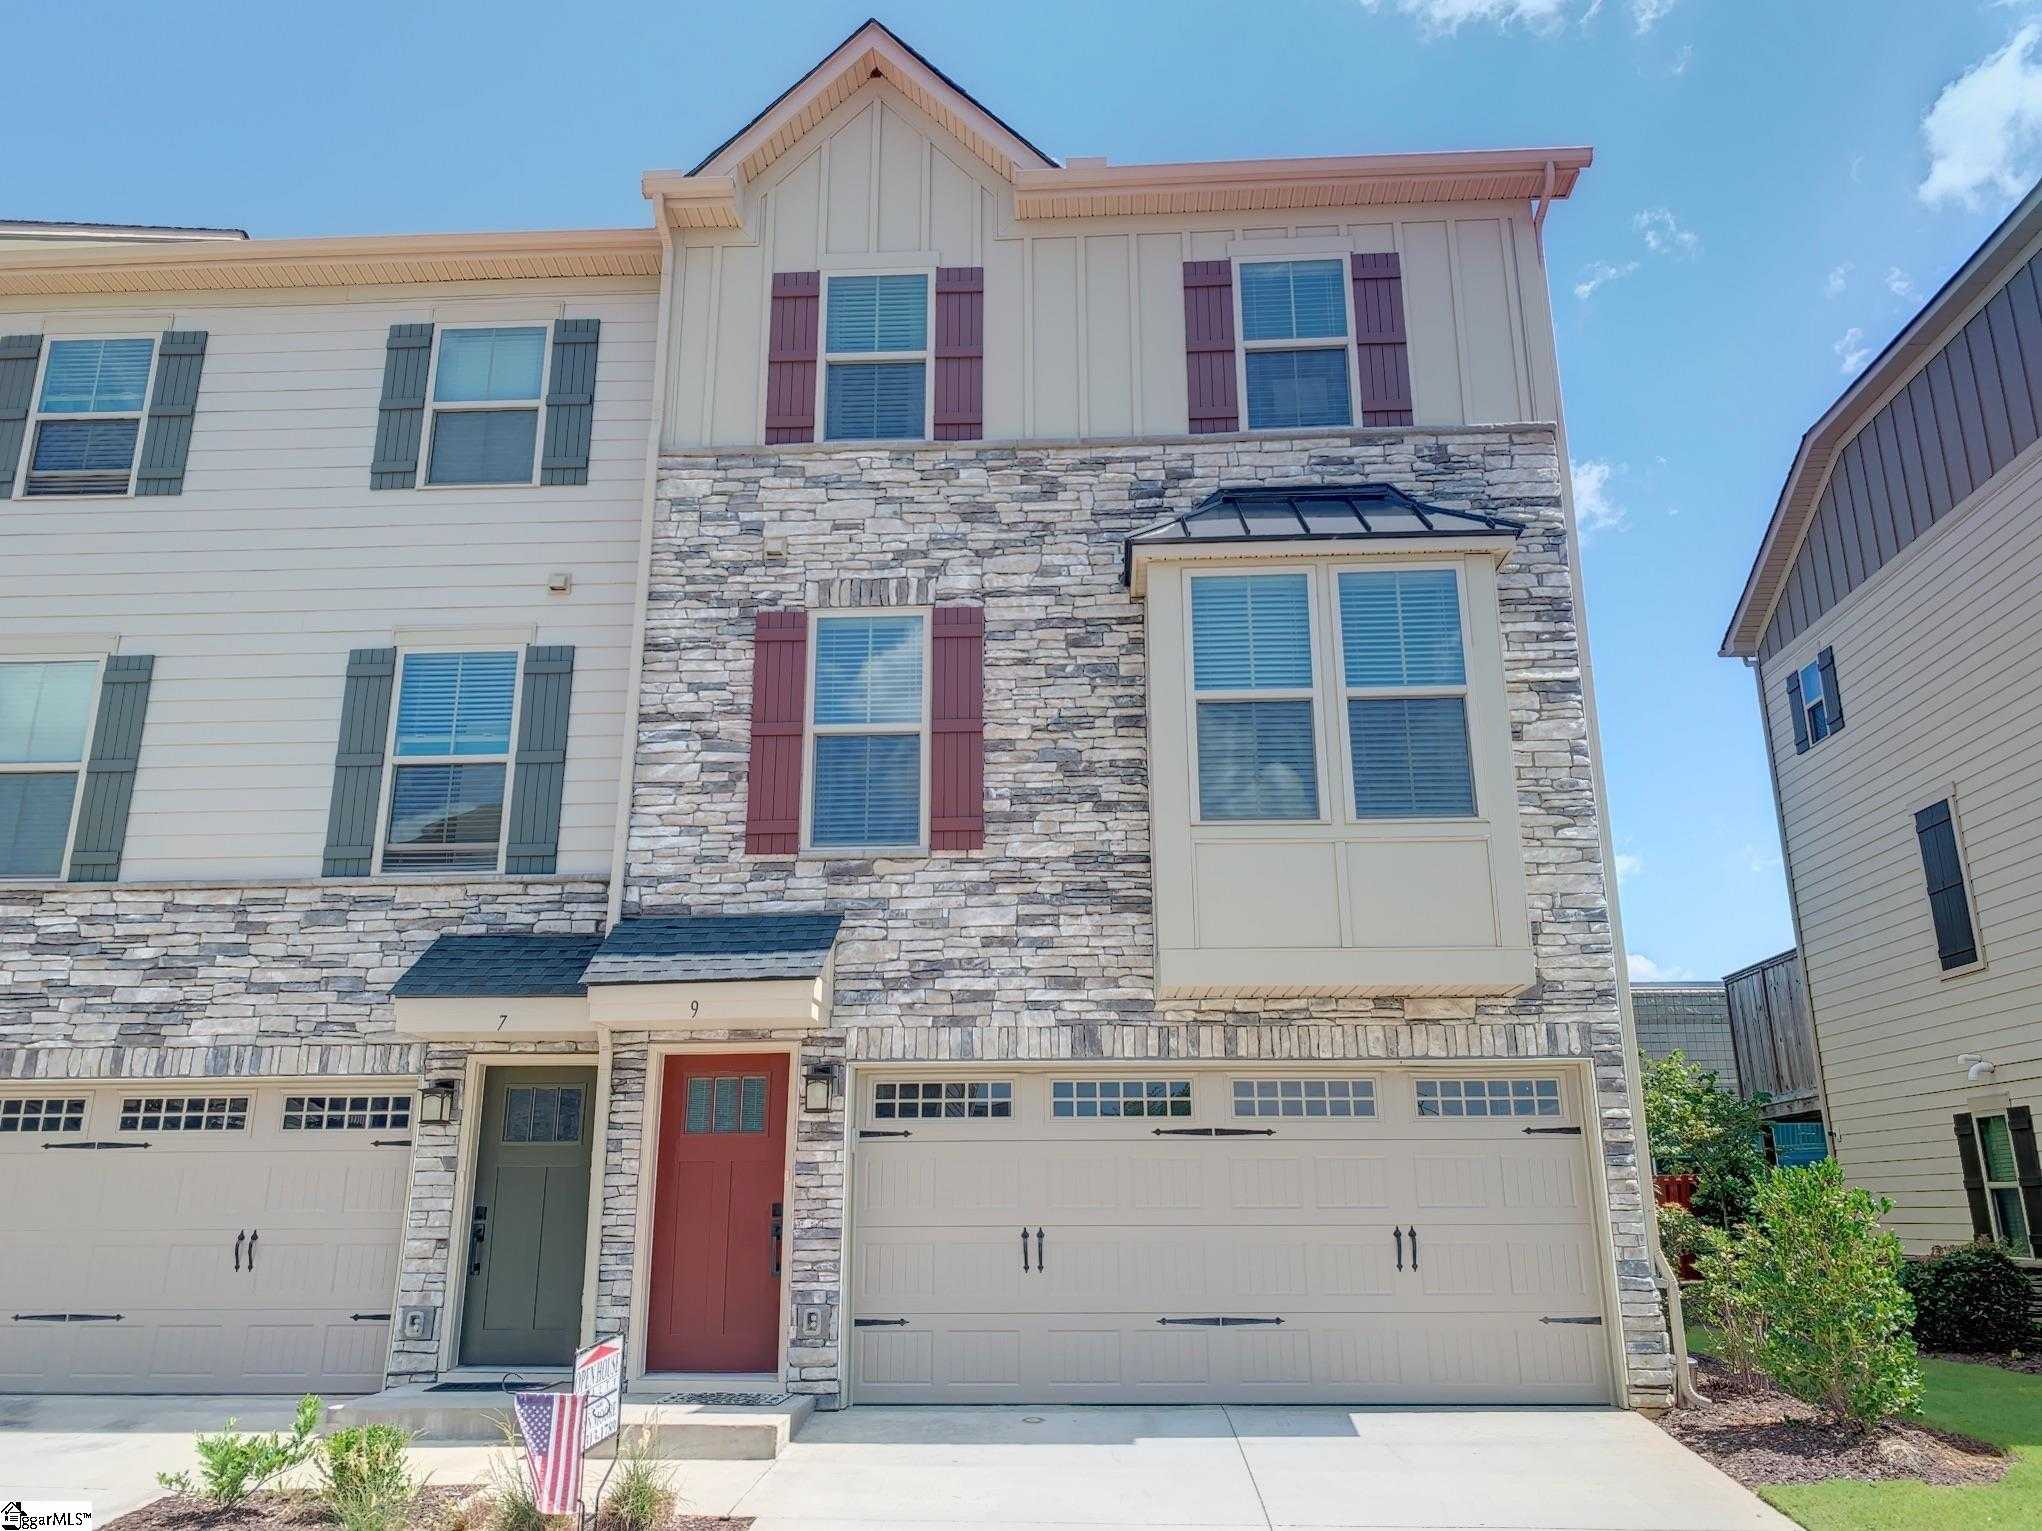 View Greenville, SC 29607 townhome